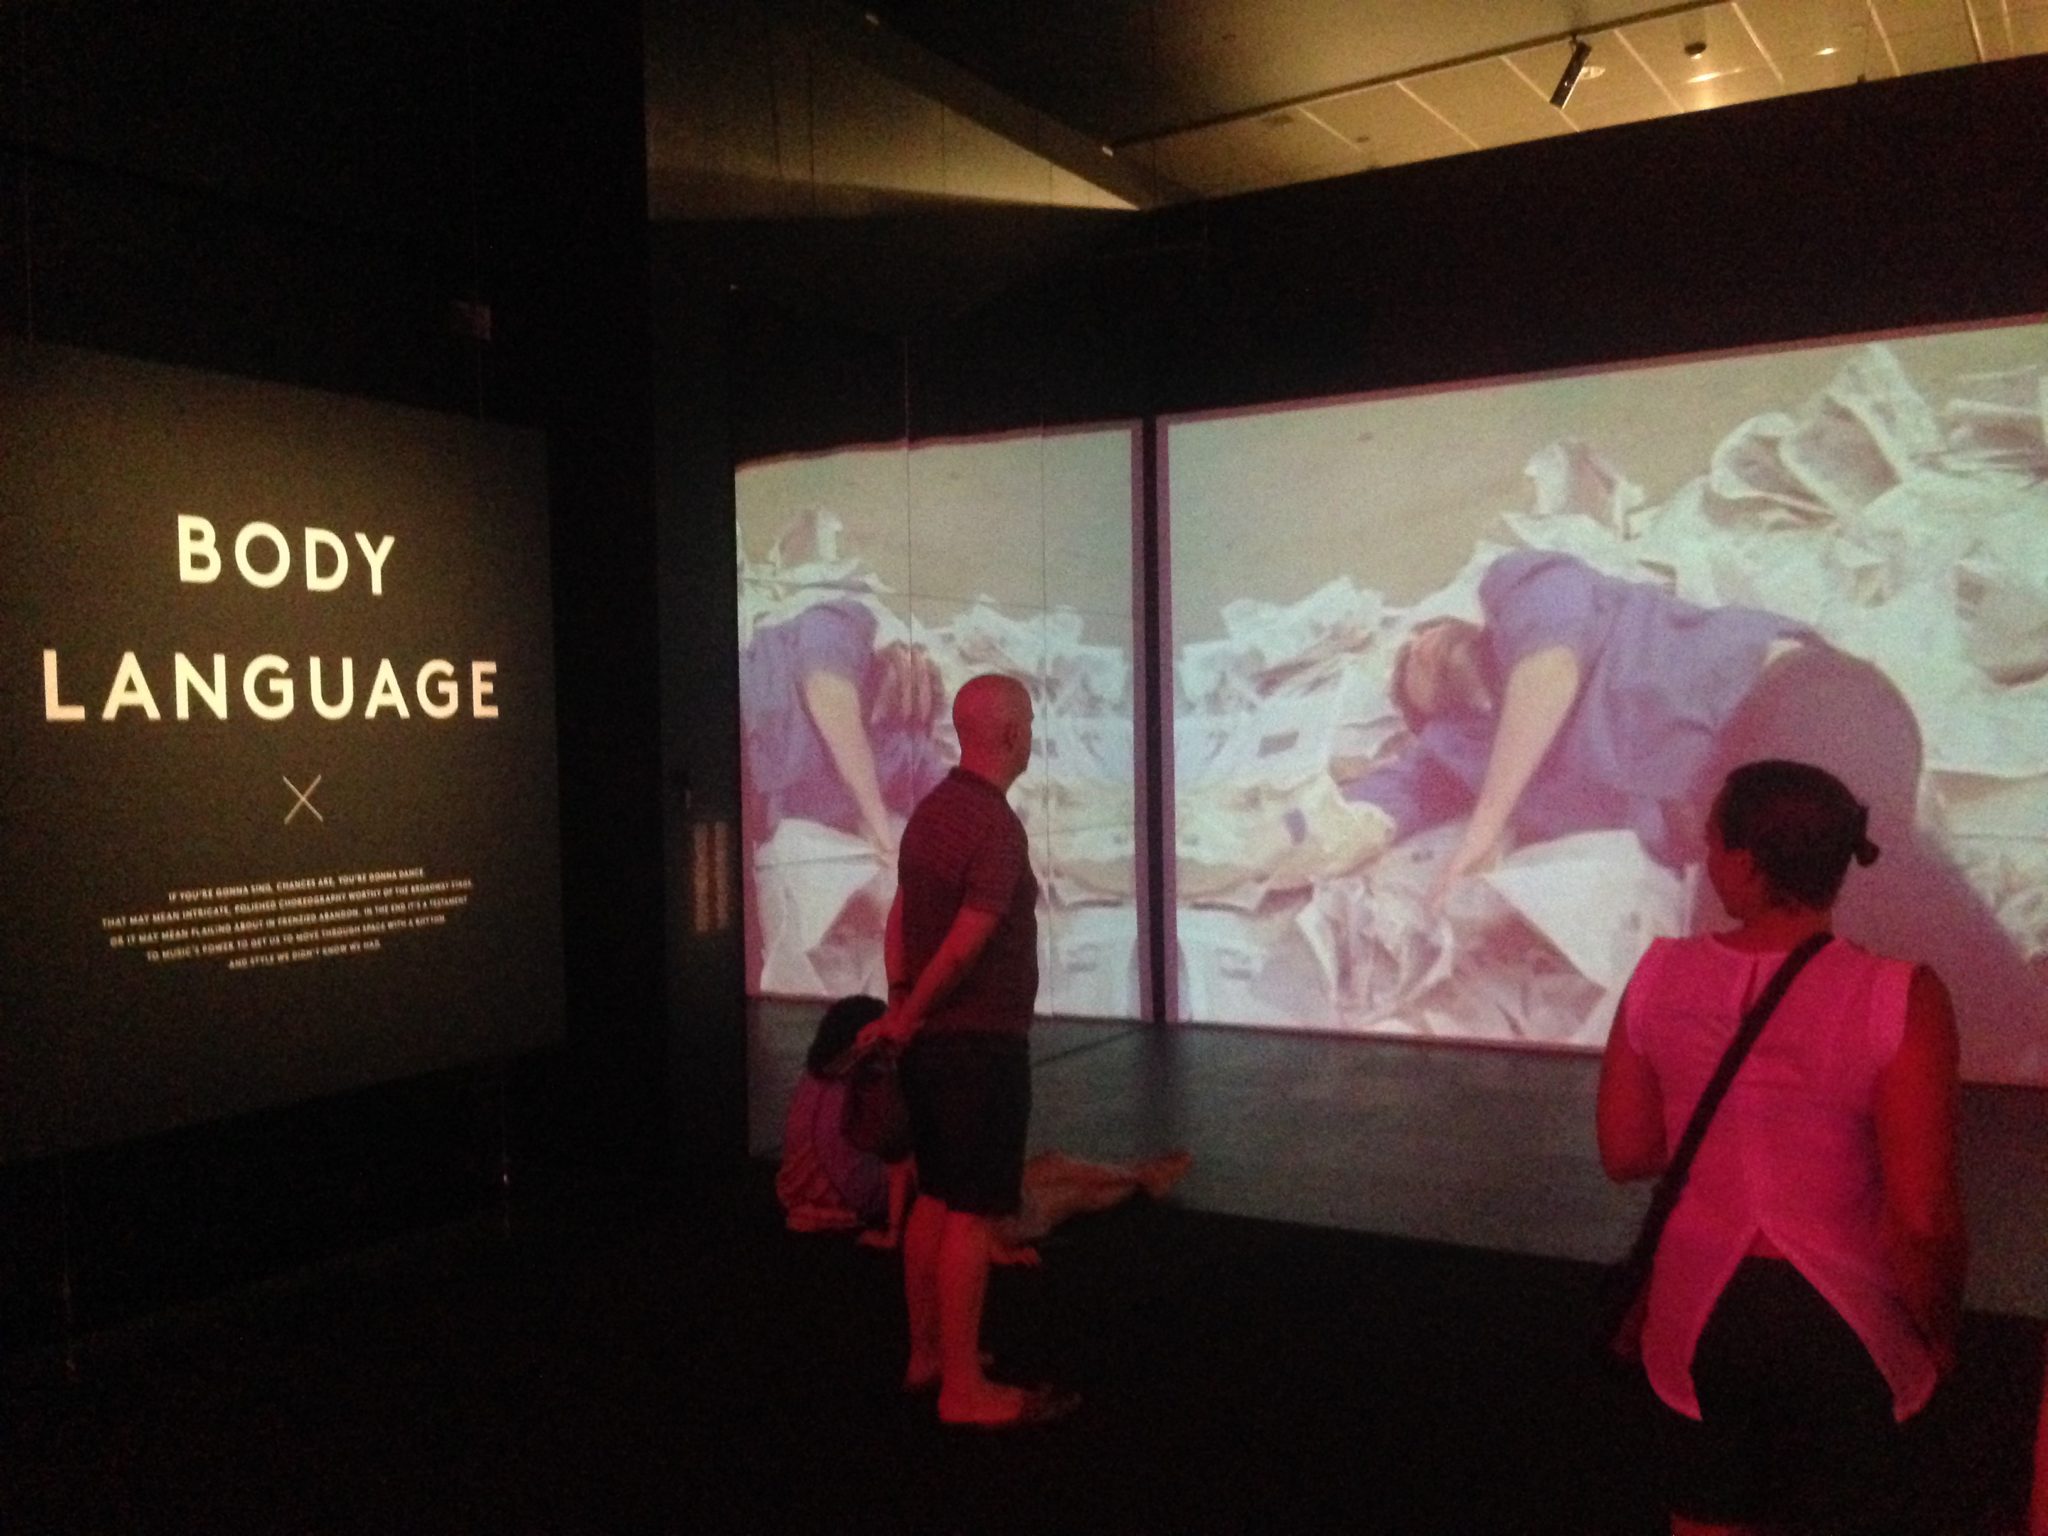 Music videos create a Spectacle at ACMI